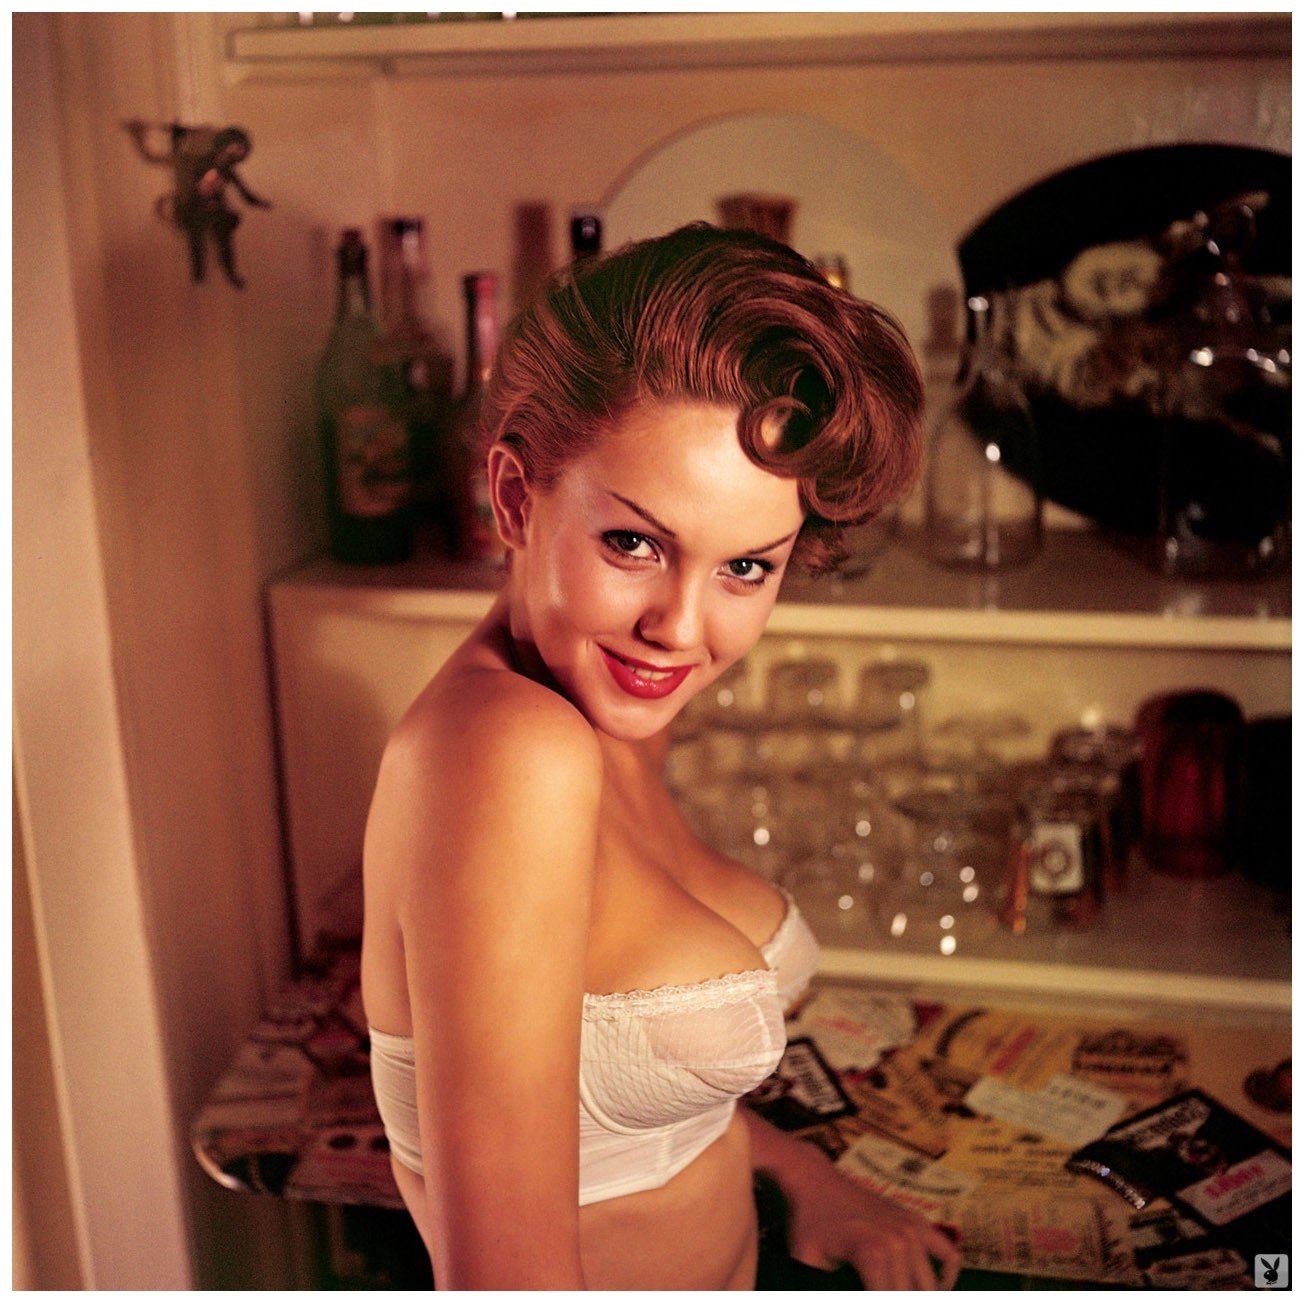 Photo by nudes-des-artiste with the username @nudes-des-artiste,  March 16, 2020 at 12:51 PM. The post is about the topic Beautiful Redheads and the text says 'Colleen Farrington is Diane Lane’s mother! Fantastic body, beautiful face - the whole package. This is a shot from her October 1957 PMOM pictorial, which displays her ample cleavage wonderfully. She has a very striking face. Wow.

#ColleenFarrington..'